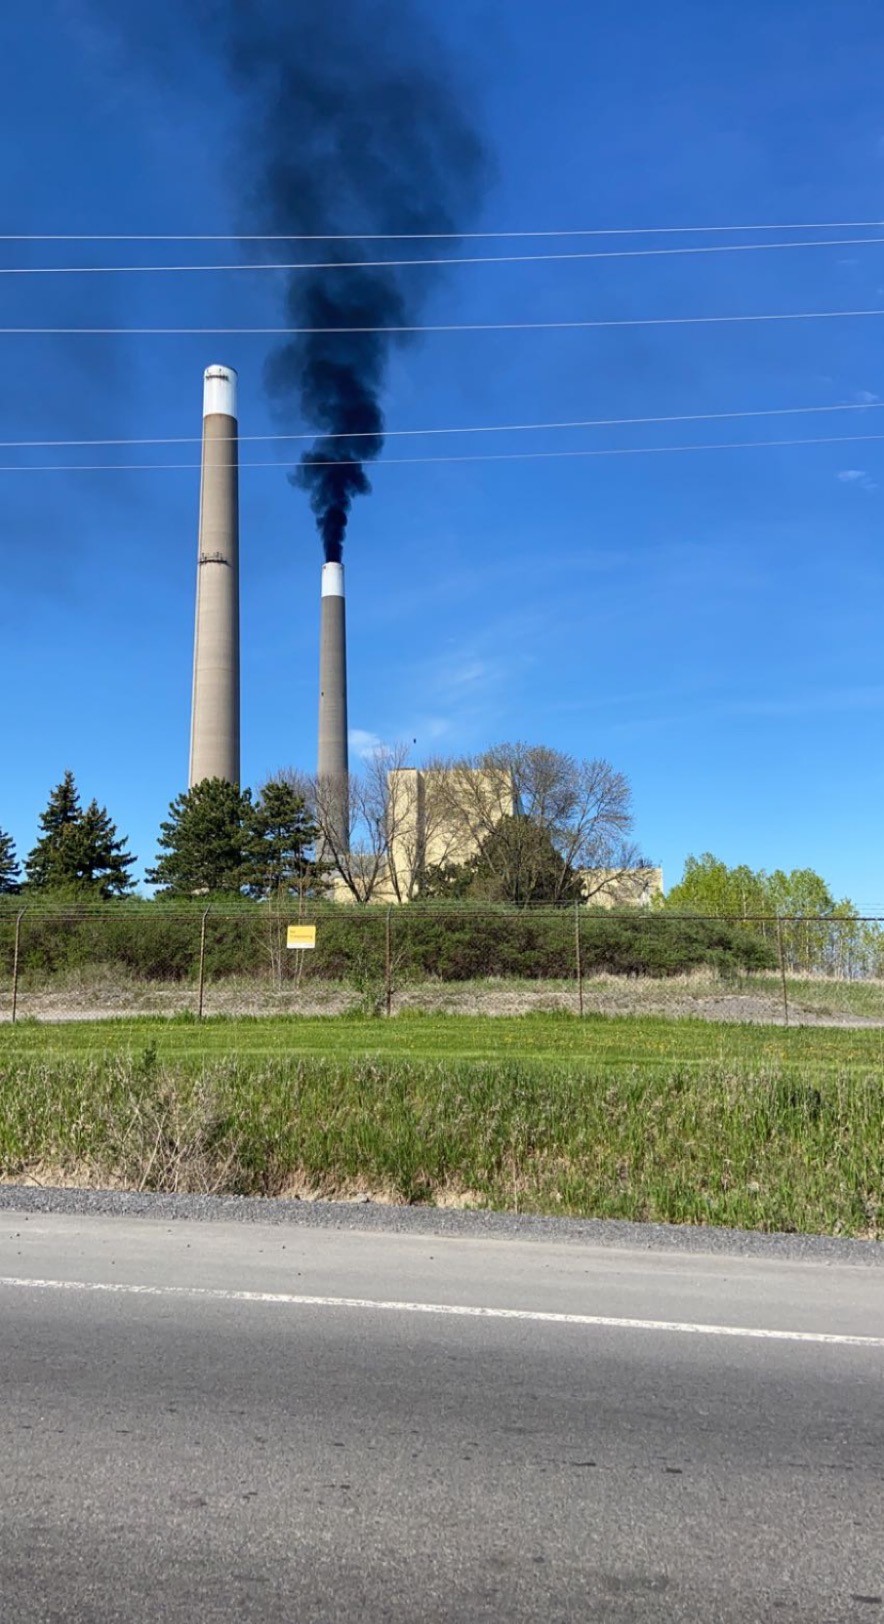 OPG says there's not concern for safety after black smoke was seen pluming from a chimney Wednesday afternoon.